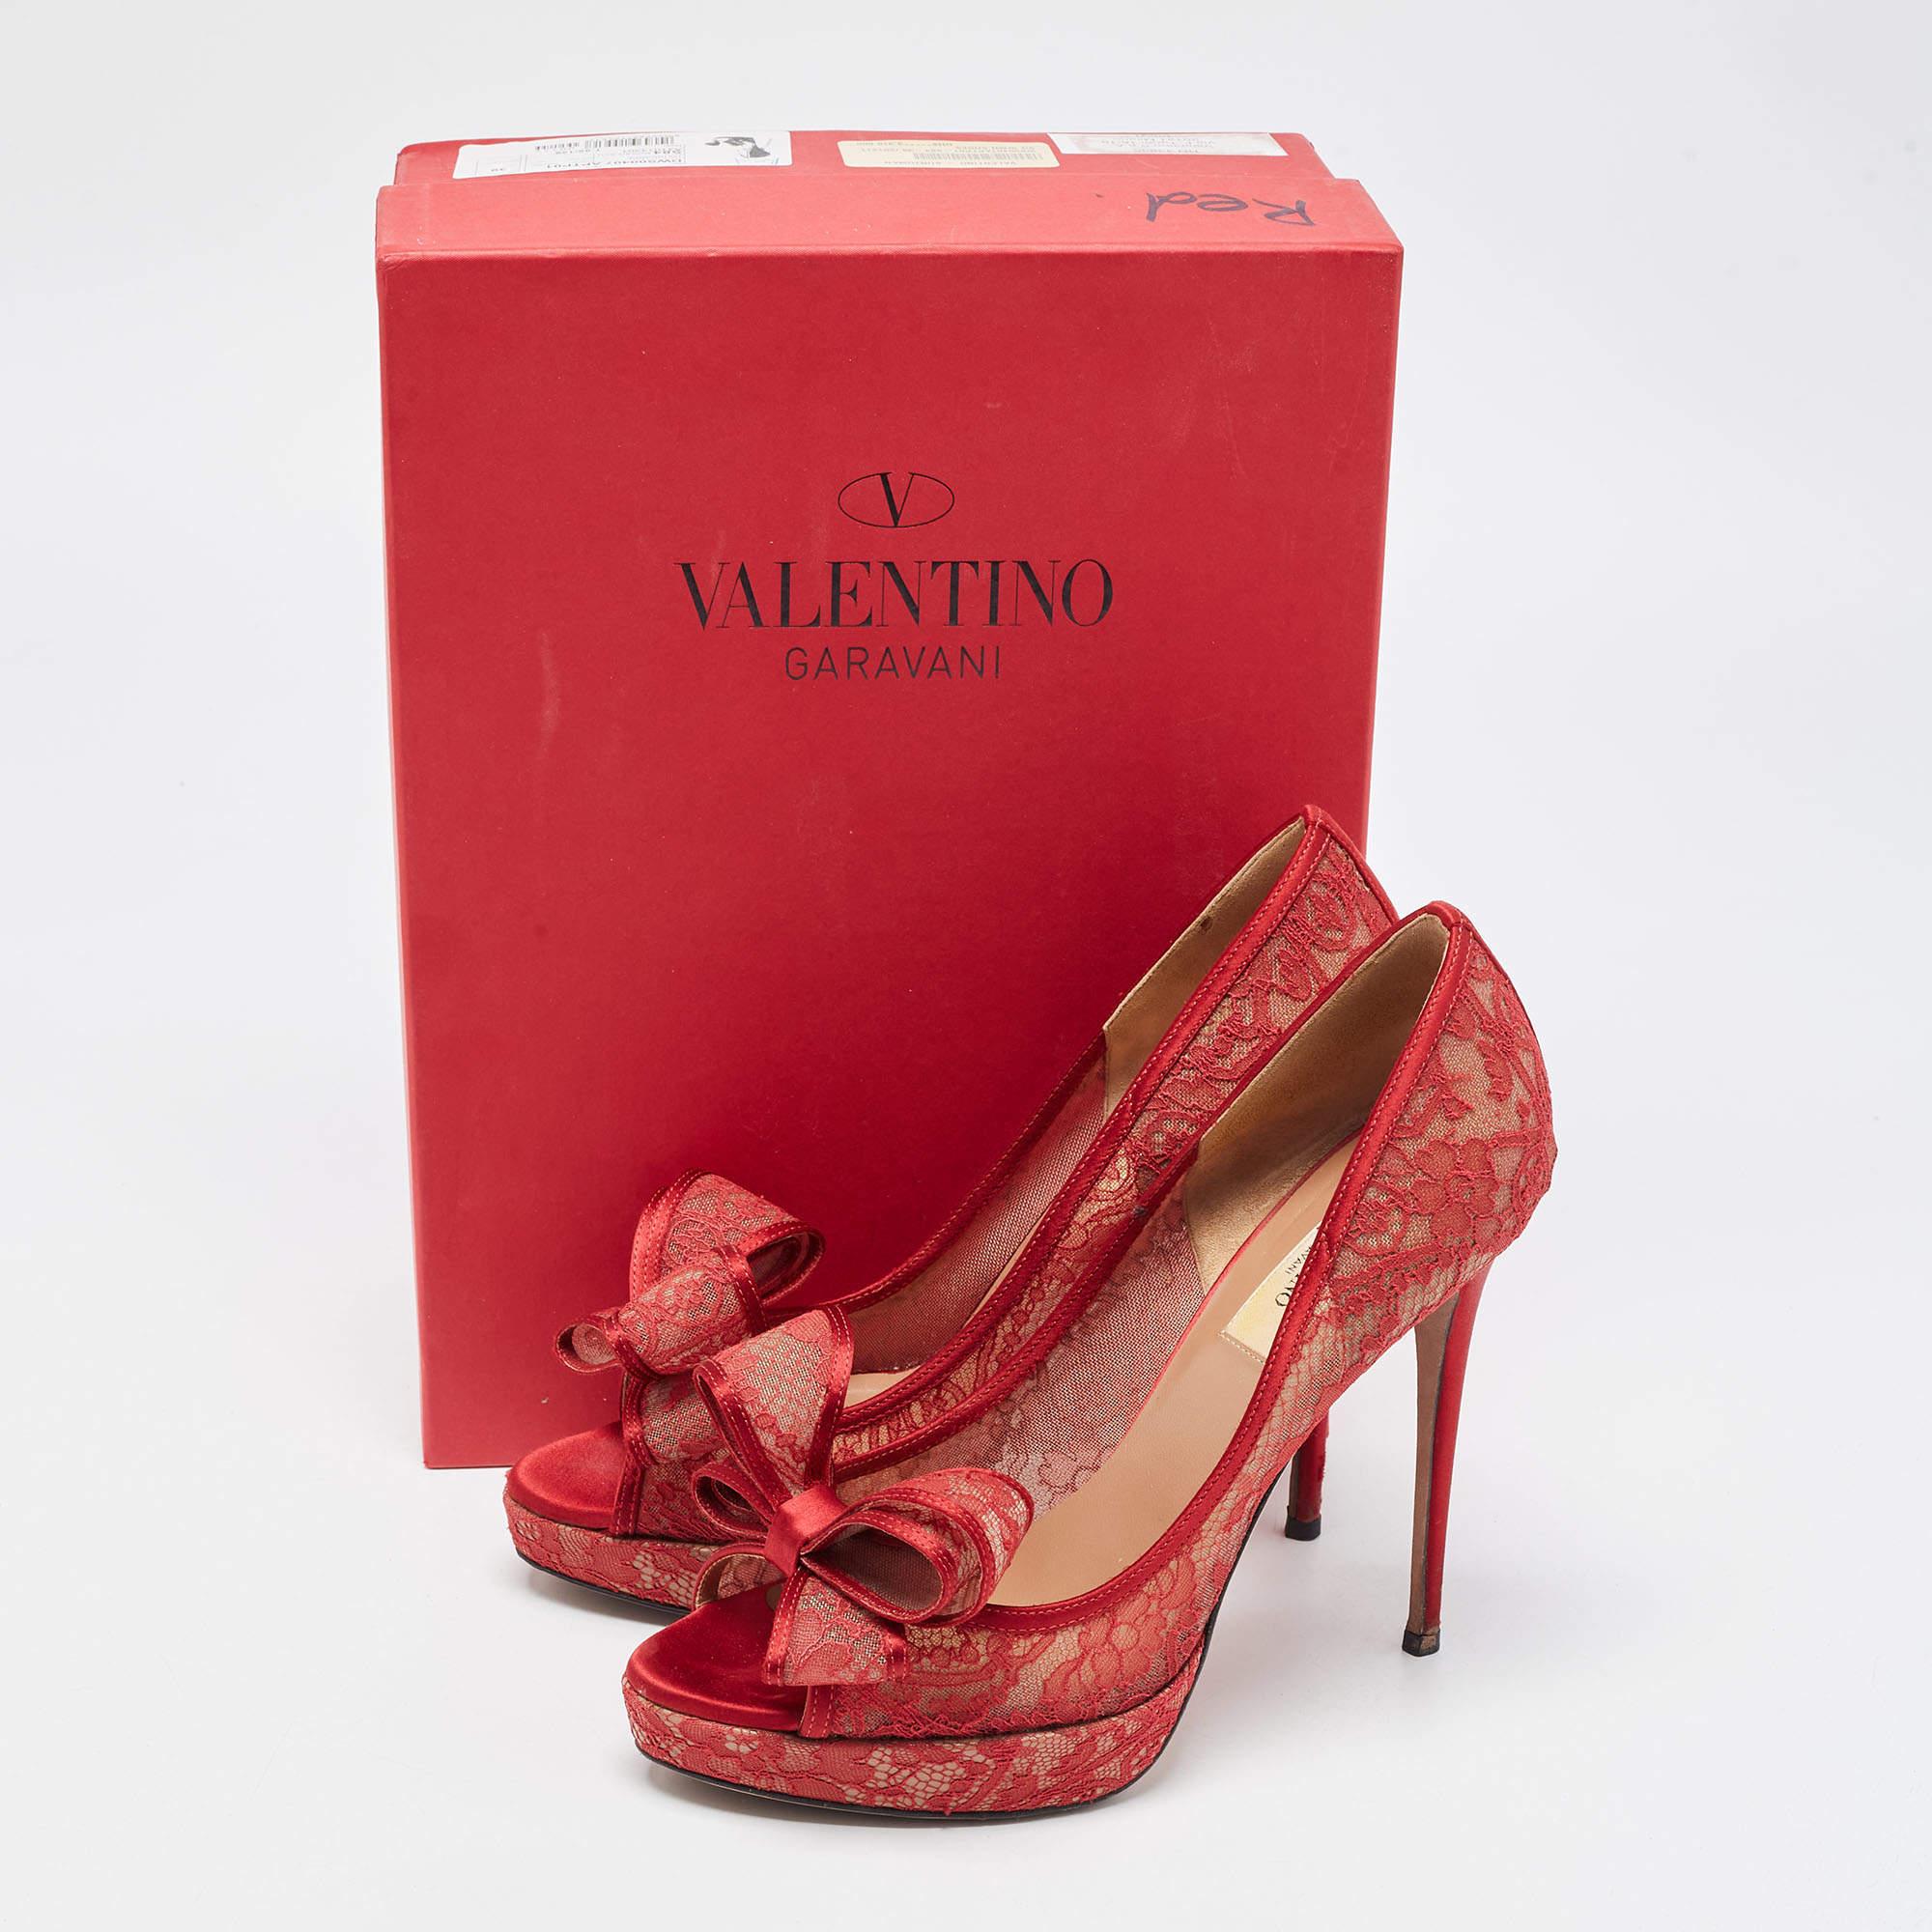 Valentino Red Satin and Lace Platform Peep Toe Pumps Size 39 5